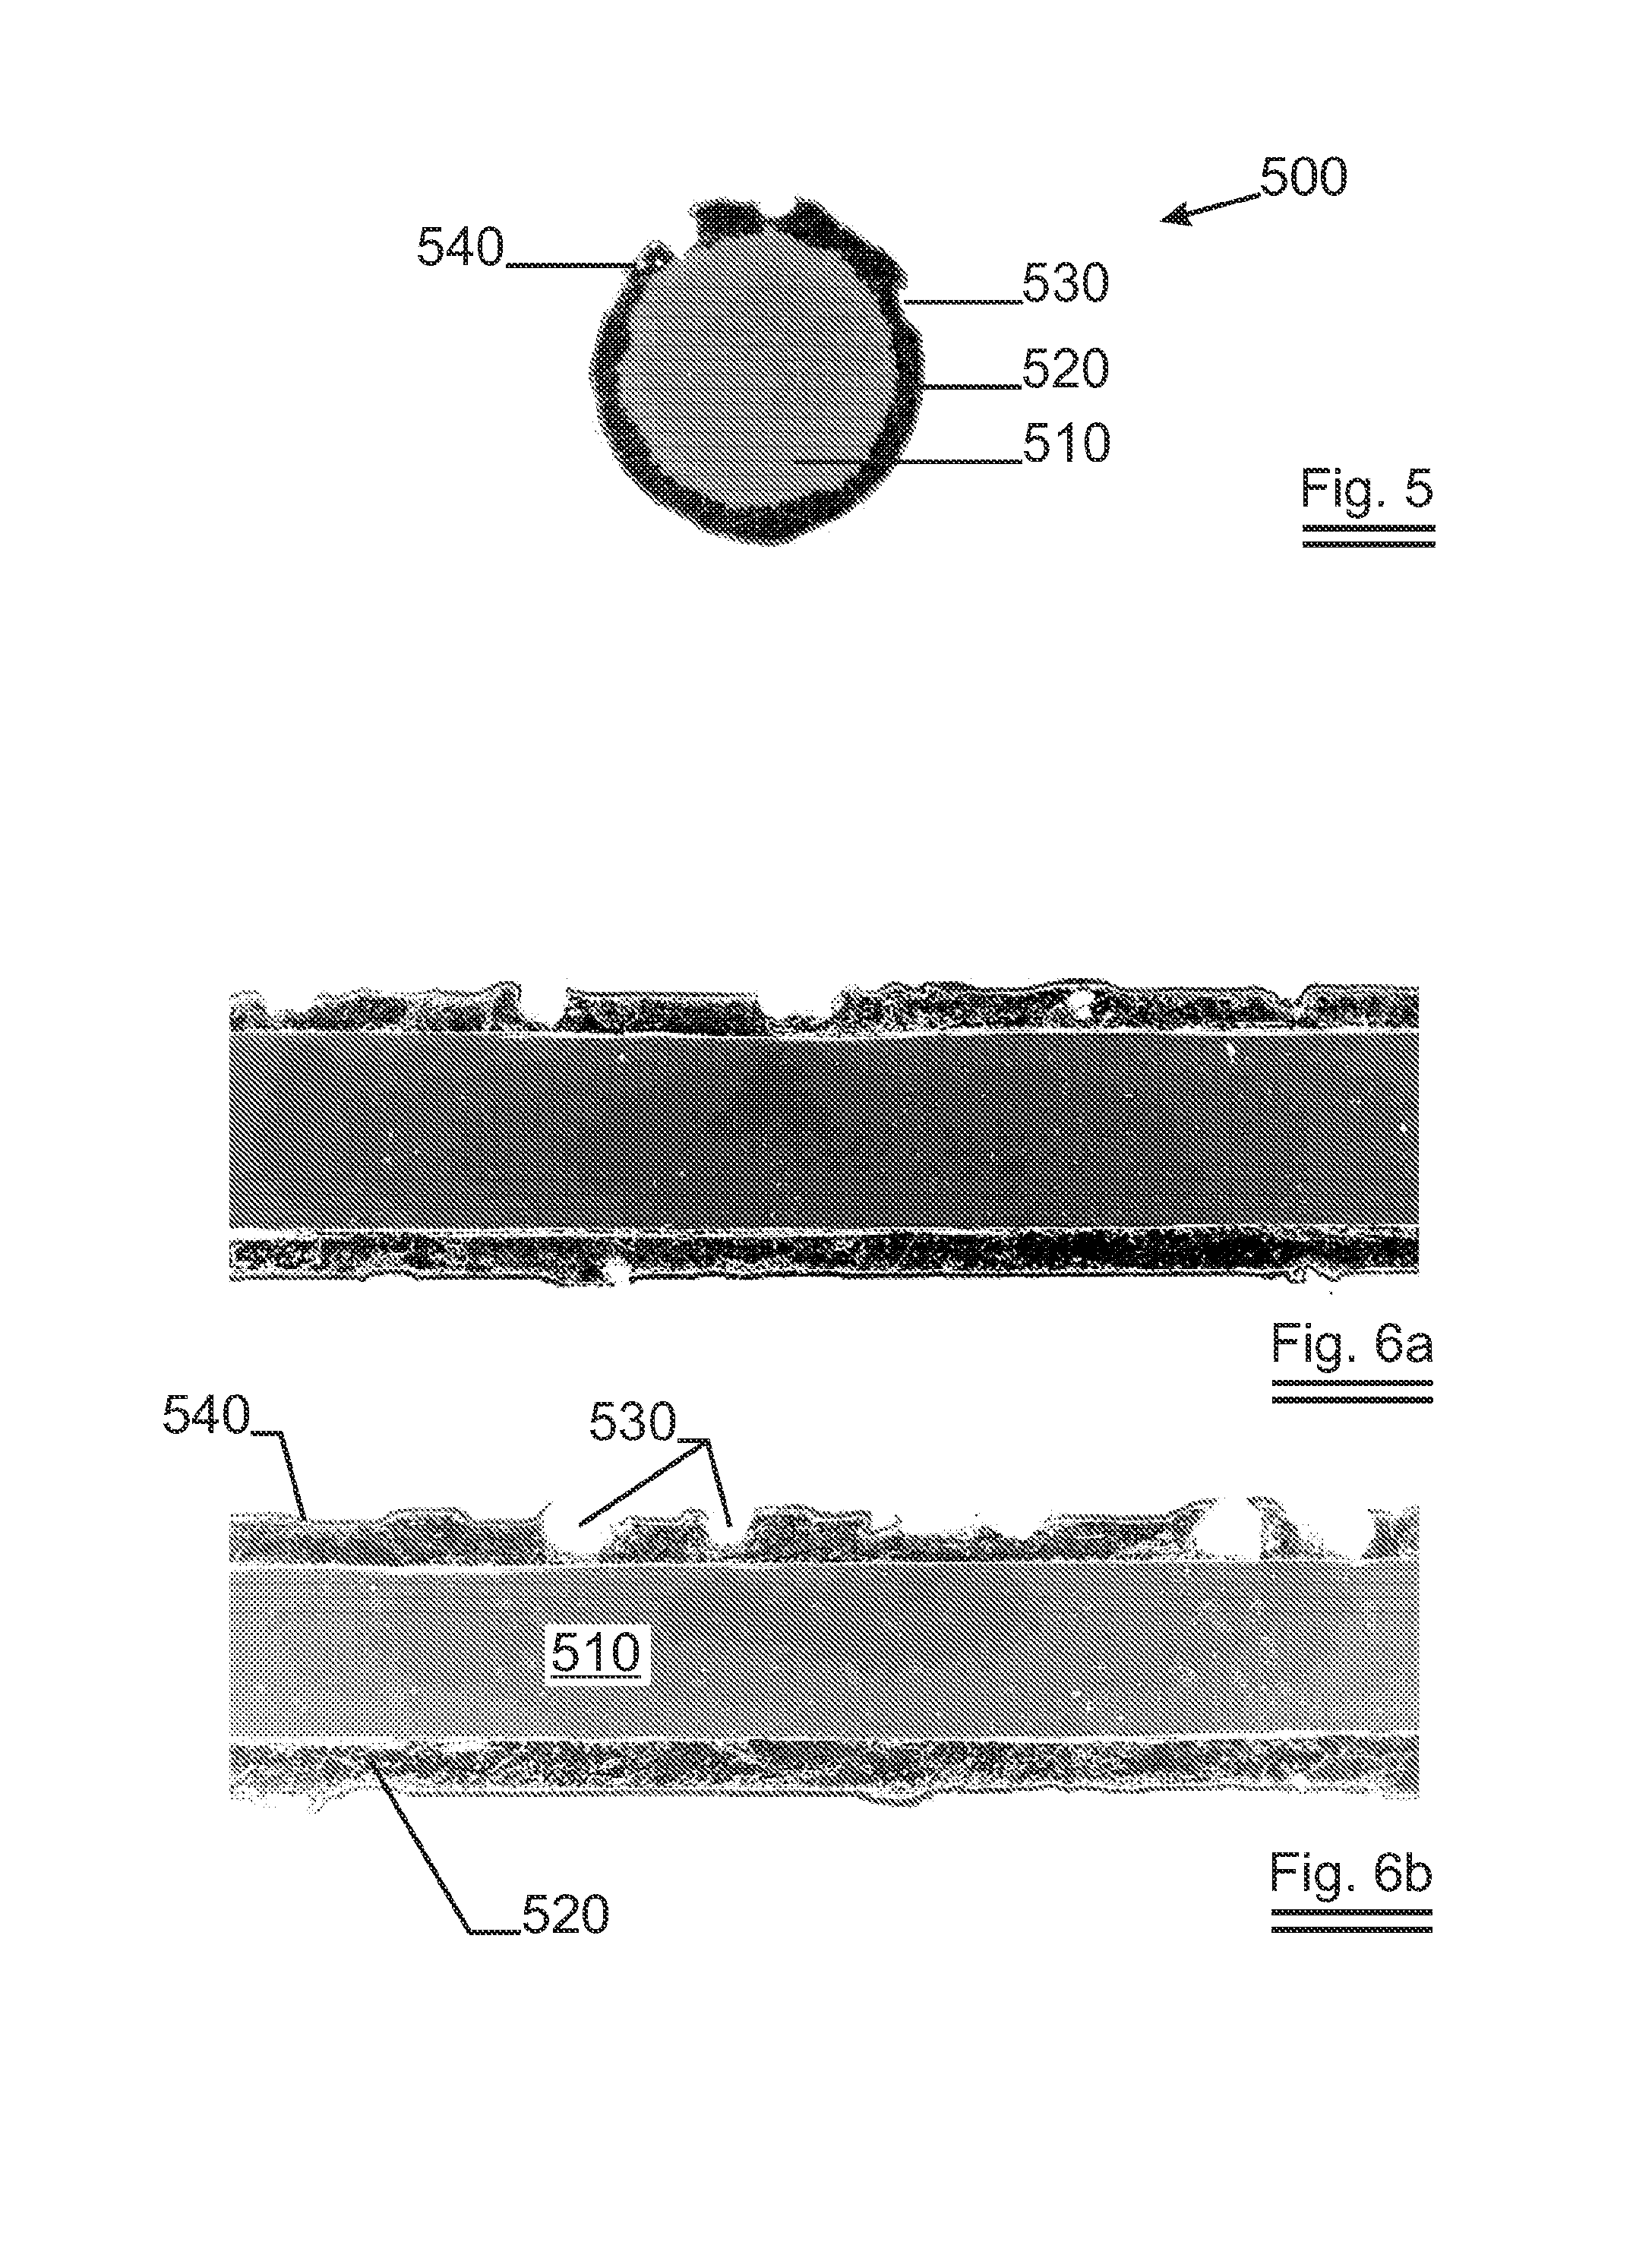 Fixed abrasive sawing wire with a rough interface between core and outer sheath